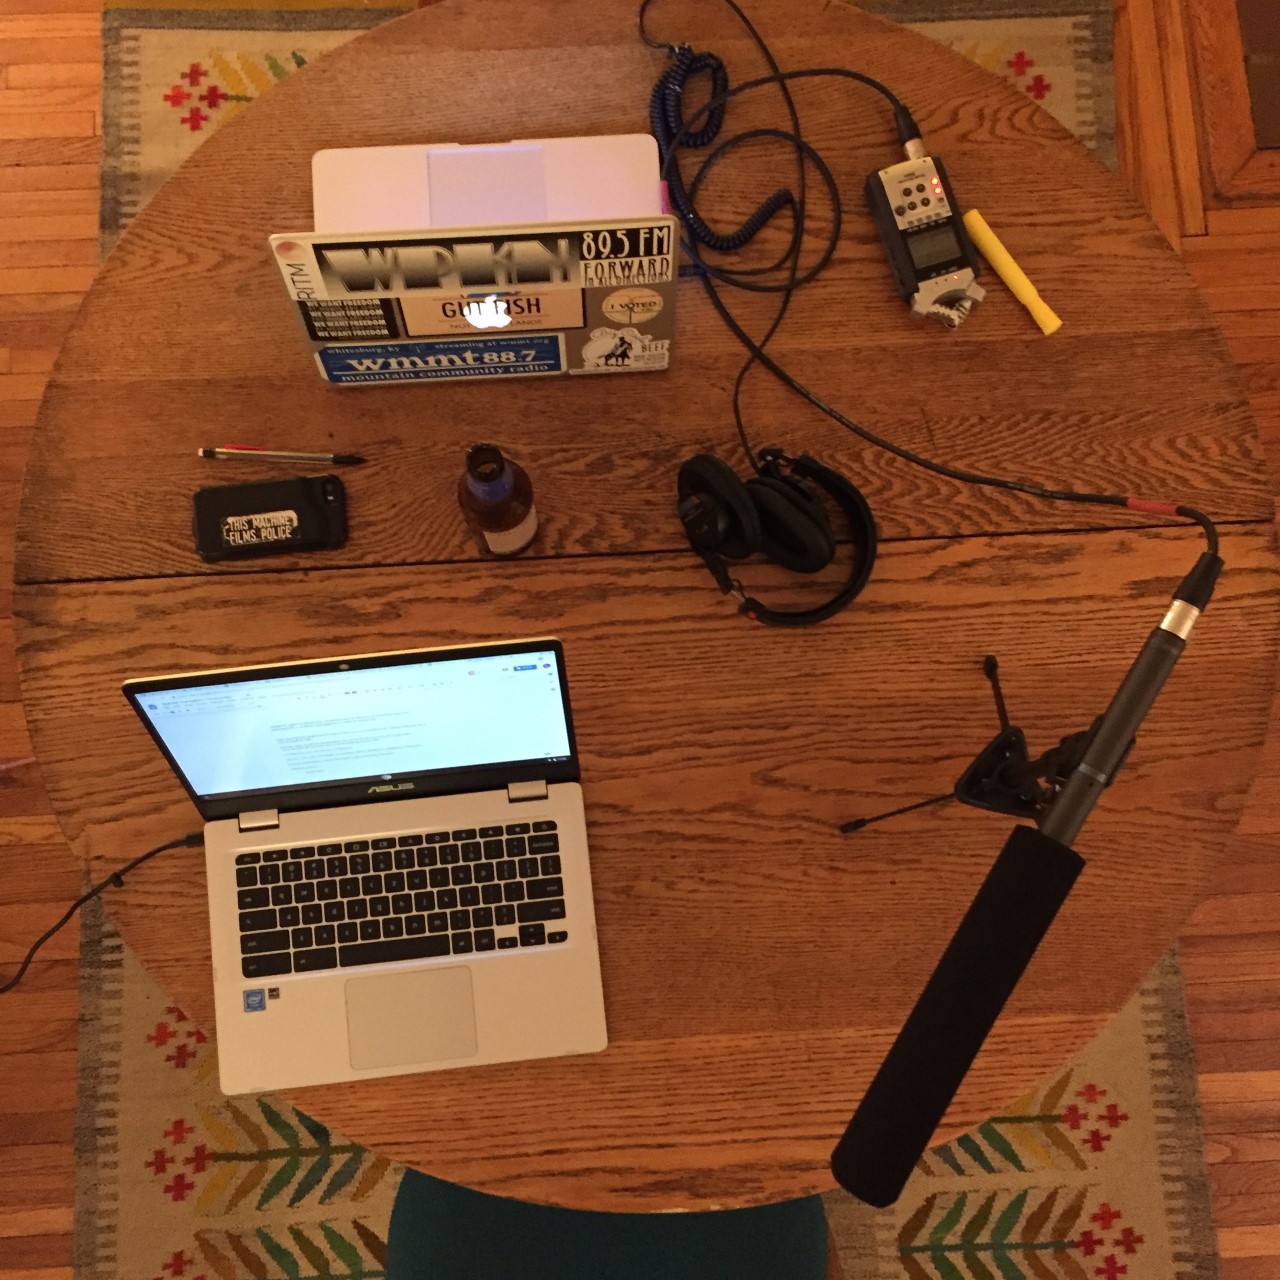 a bird's eye view of a circular wooden kitchen table. On top of the table are two laptops facing each other, hooked up to recorders and microphones.